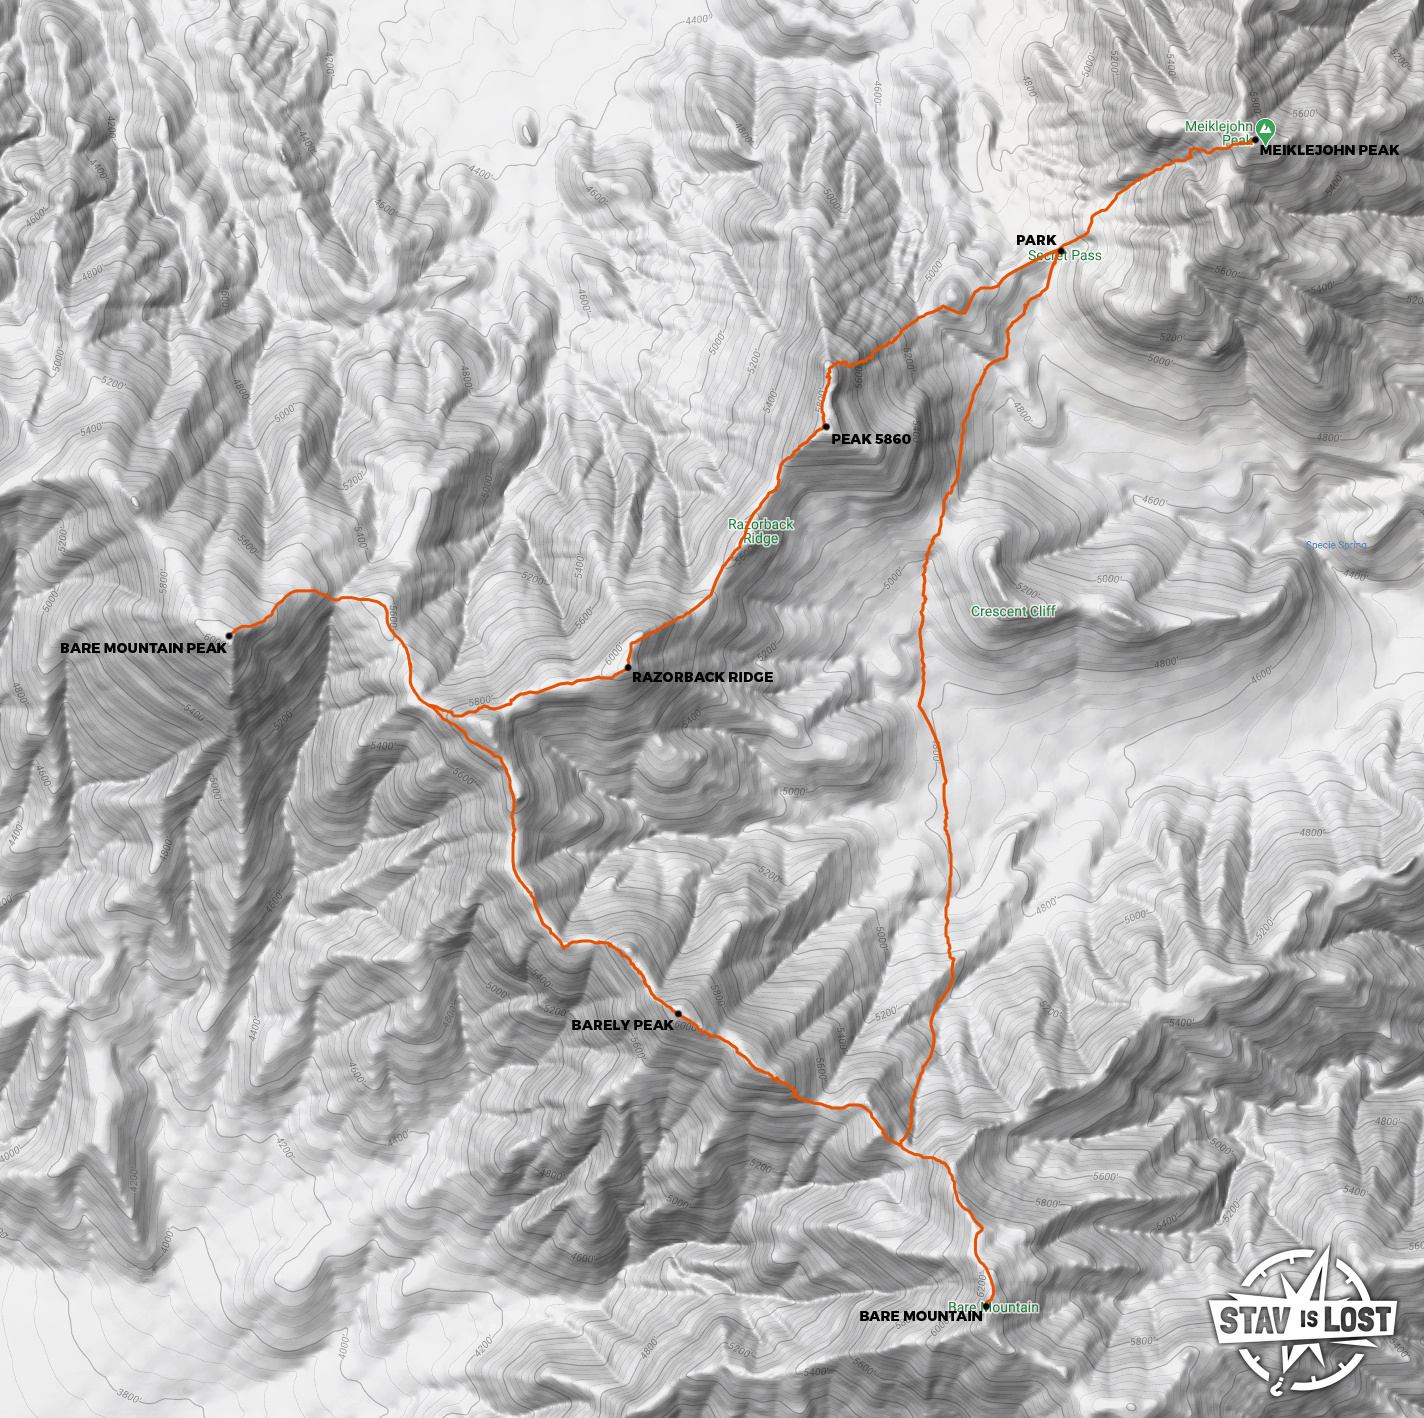 map for Bare Mountains Loop by stav is lost